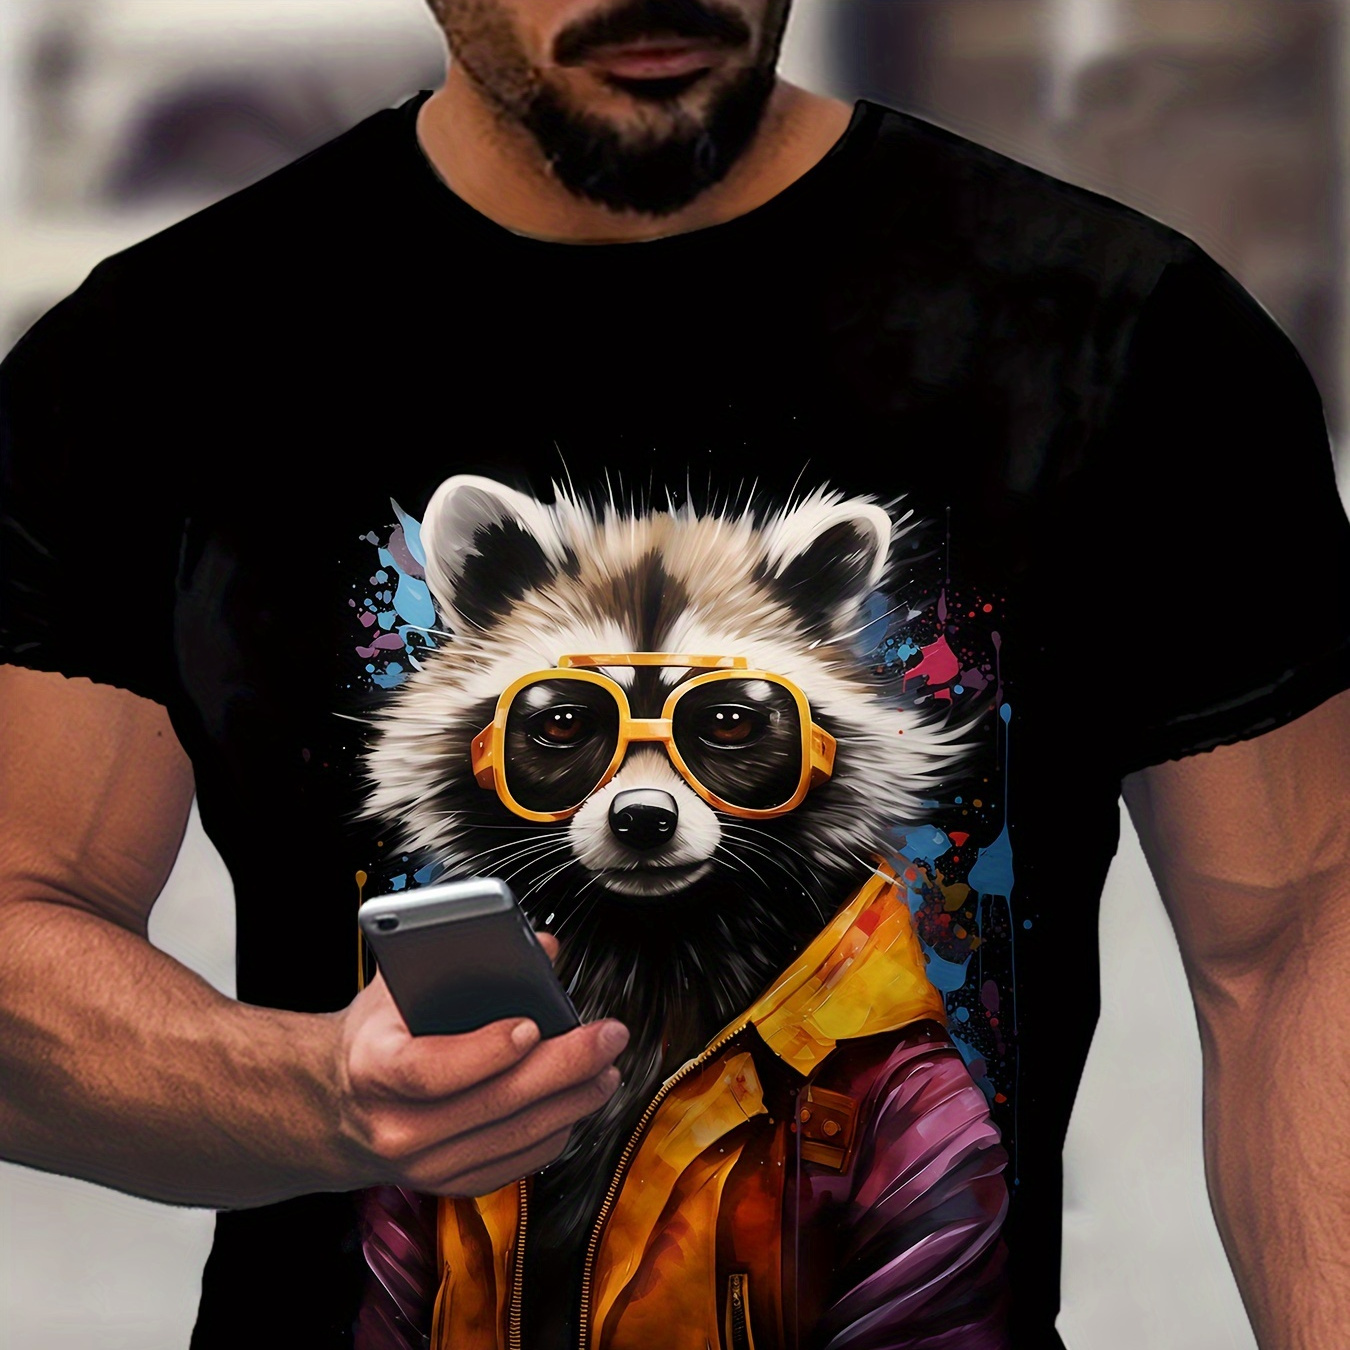 

Men's Stylish Raccoon Pattern Crew Neck T-shirt, Casual Comfy Tees Tshirts For Summer, Men's Clothing